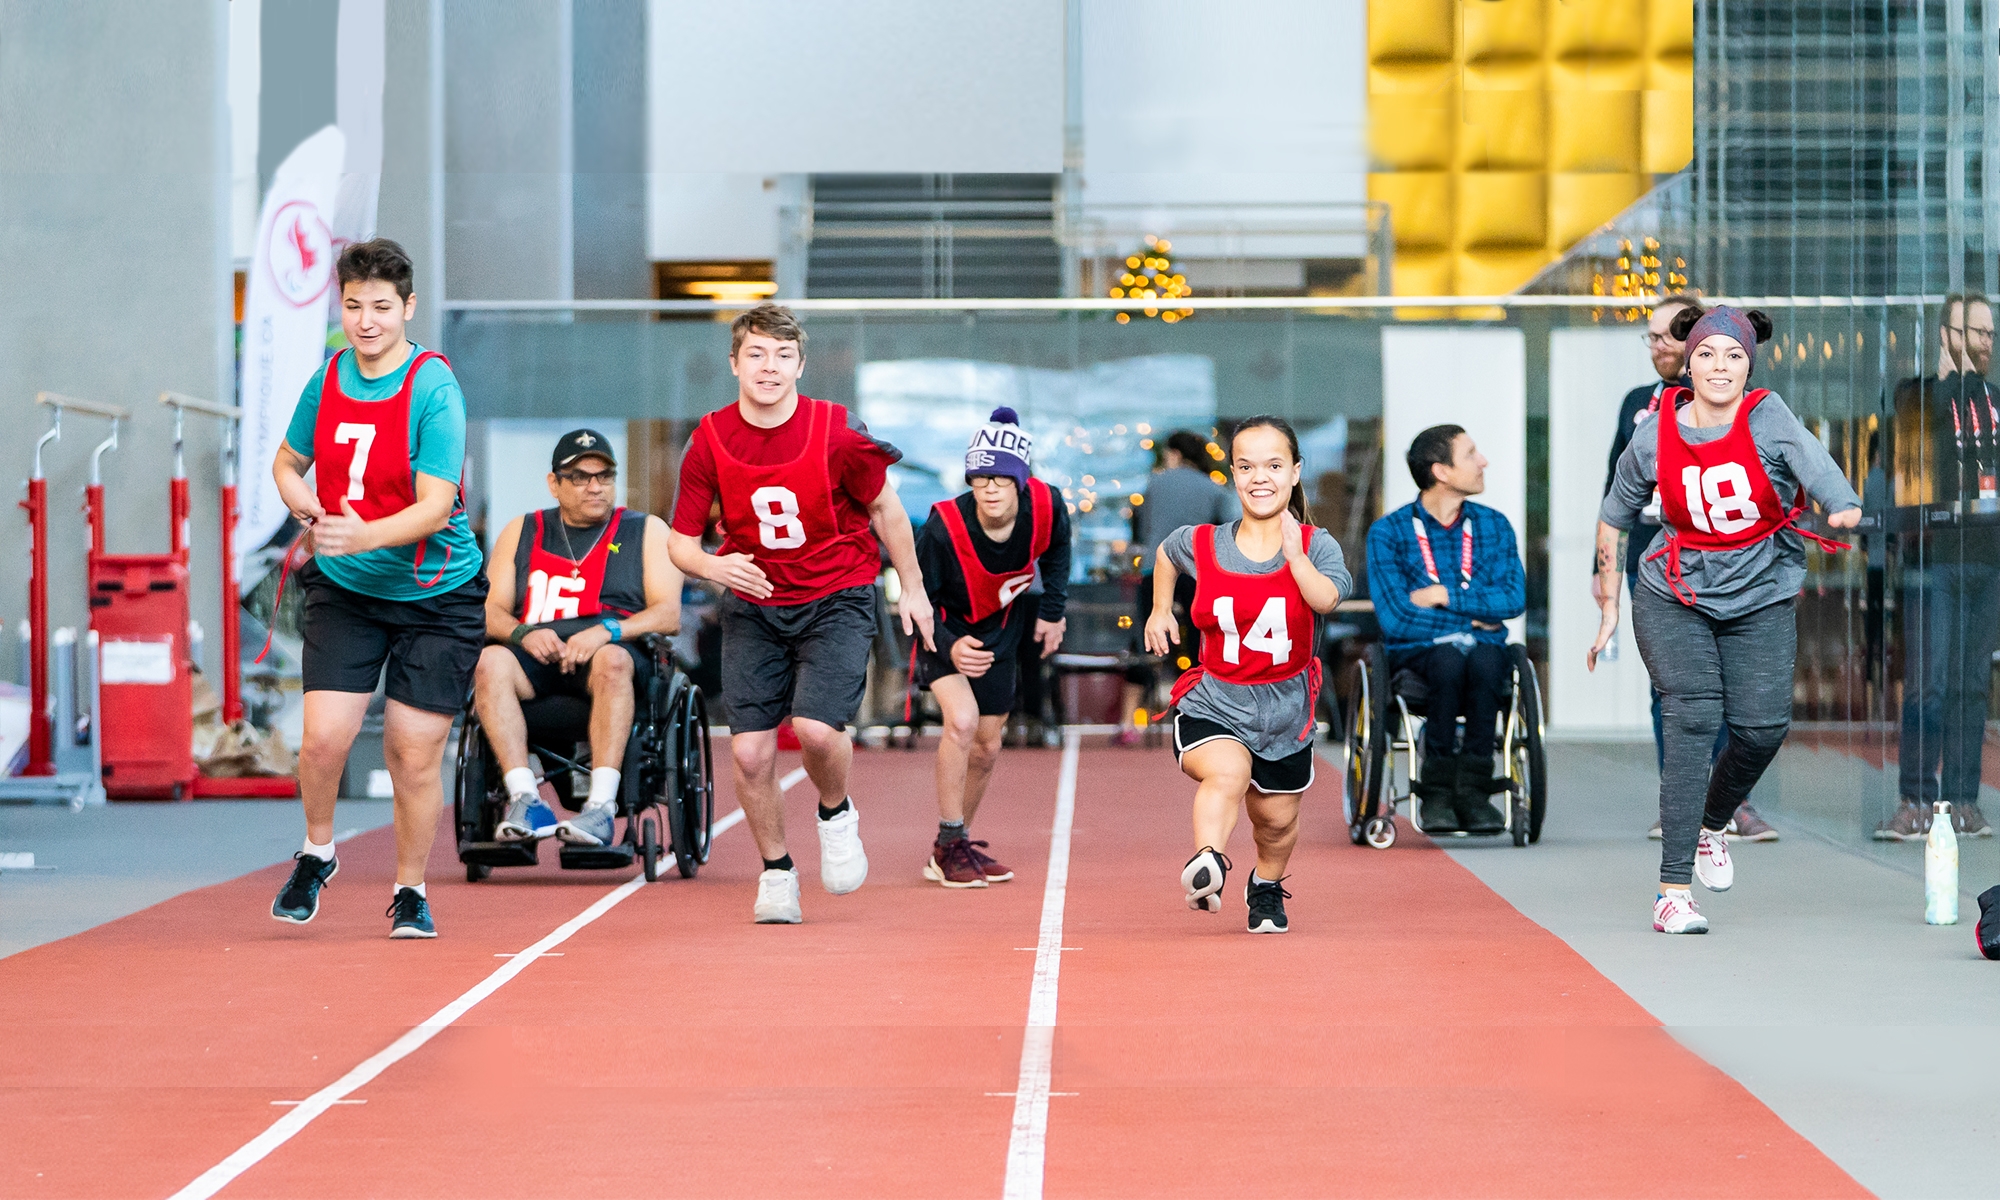 A mixed group of 7 athletes of different body shapes and sizes are shown on a track. Some are in wheelchairs. Photo credit: Canadian Paralympic Committee